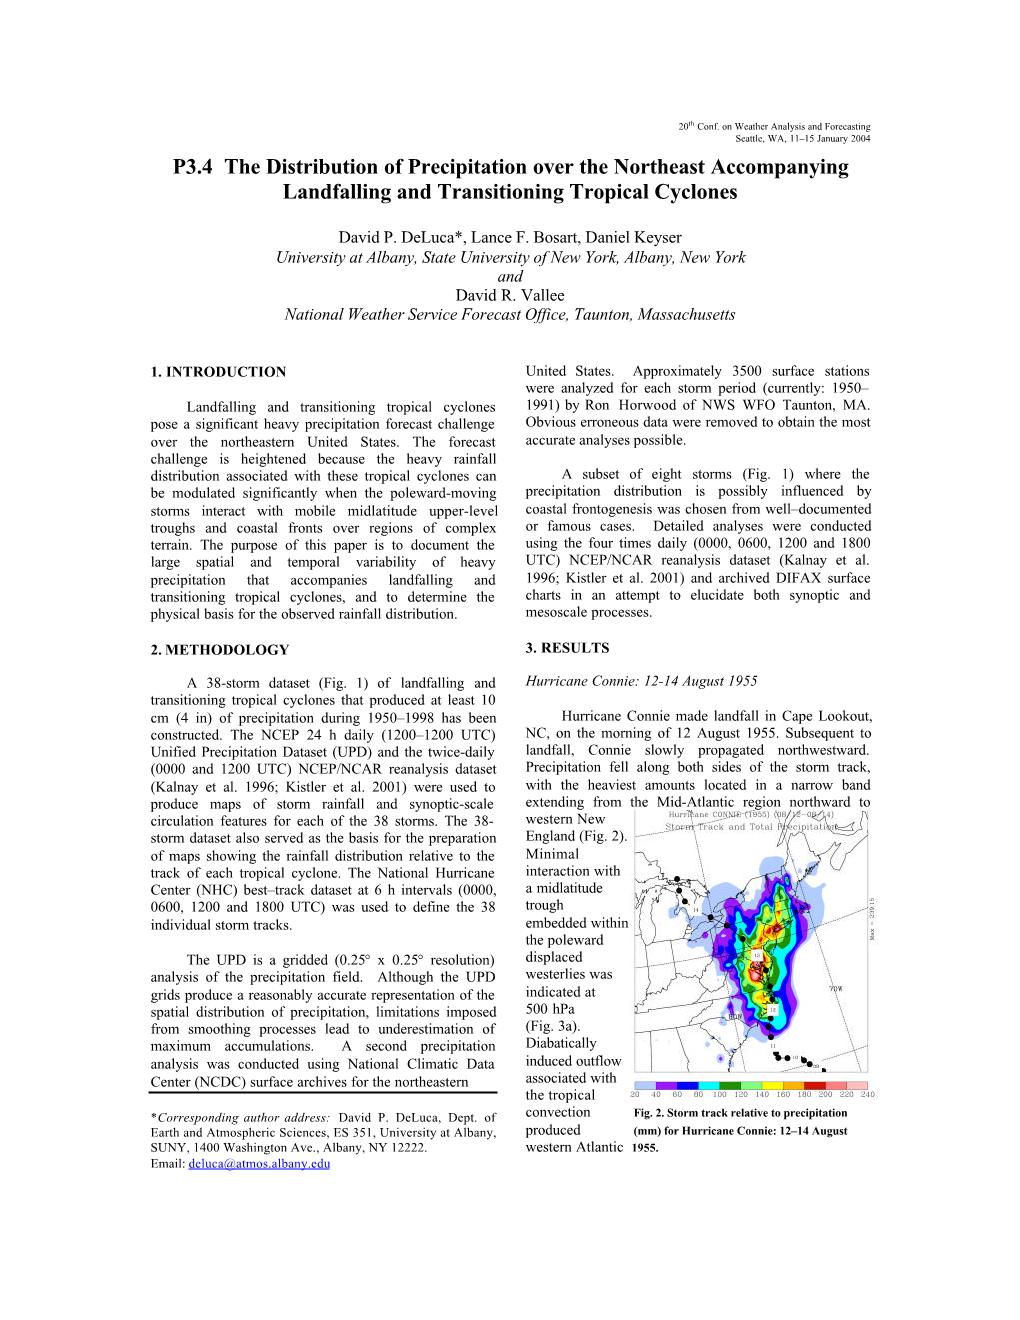 P3.4 the Distribution of Precipitation Over the Northeast Accompanying Landfalling and Transitioning Tropical Cyclones